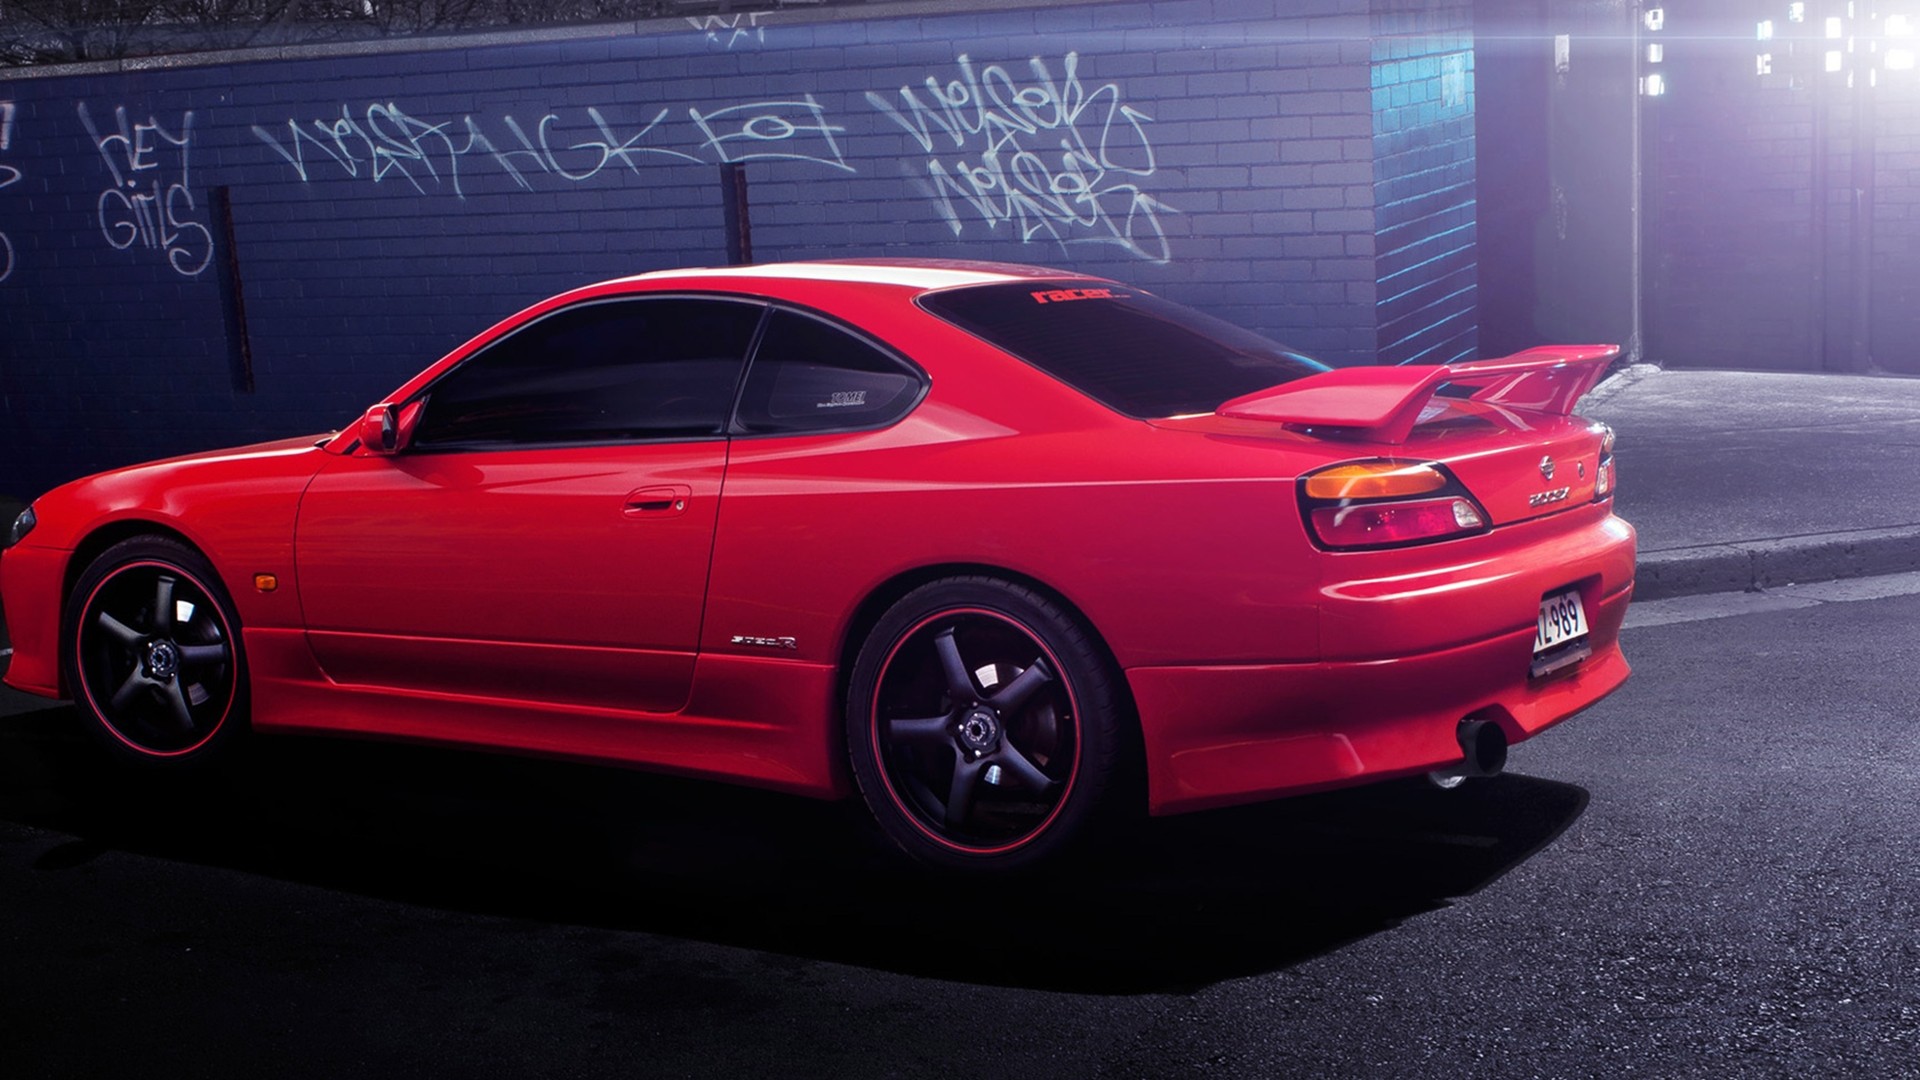 Nissan Silvia S15 - S15 Red , HD Wallpaper & Backgrounds